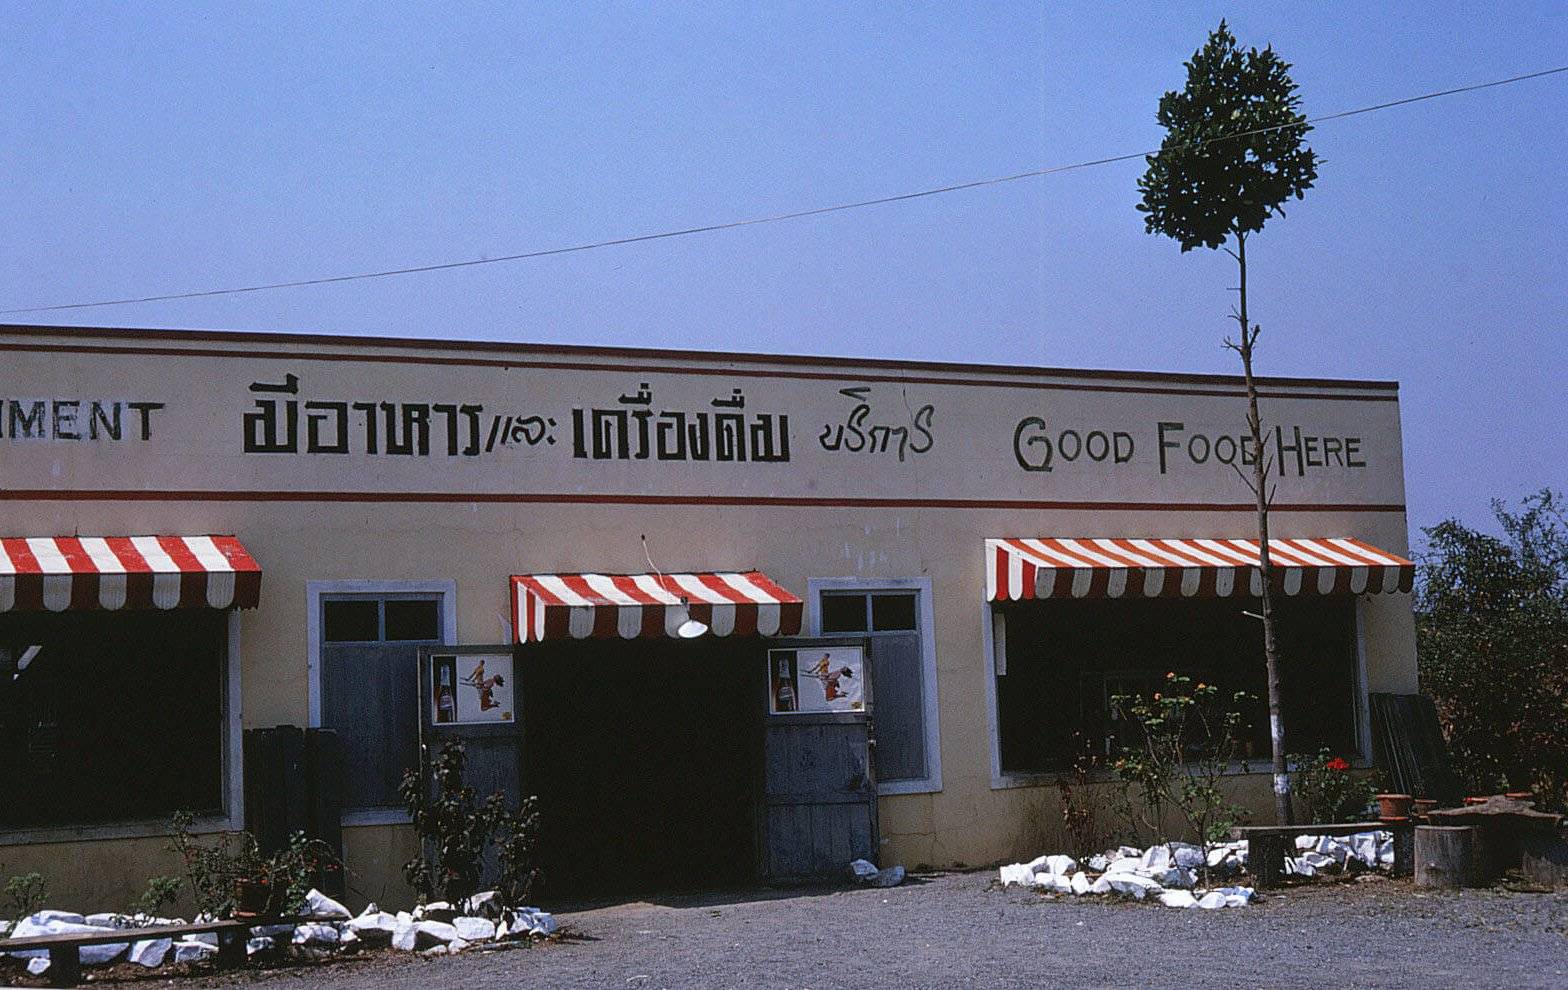 A one-story building against a blue sky. Writing on the building is in Asian language except for "Good Food Here."